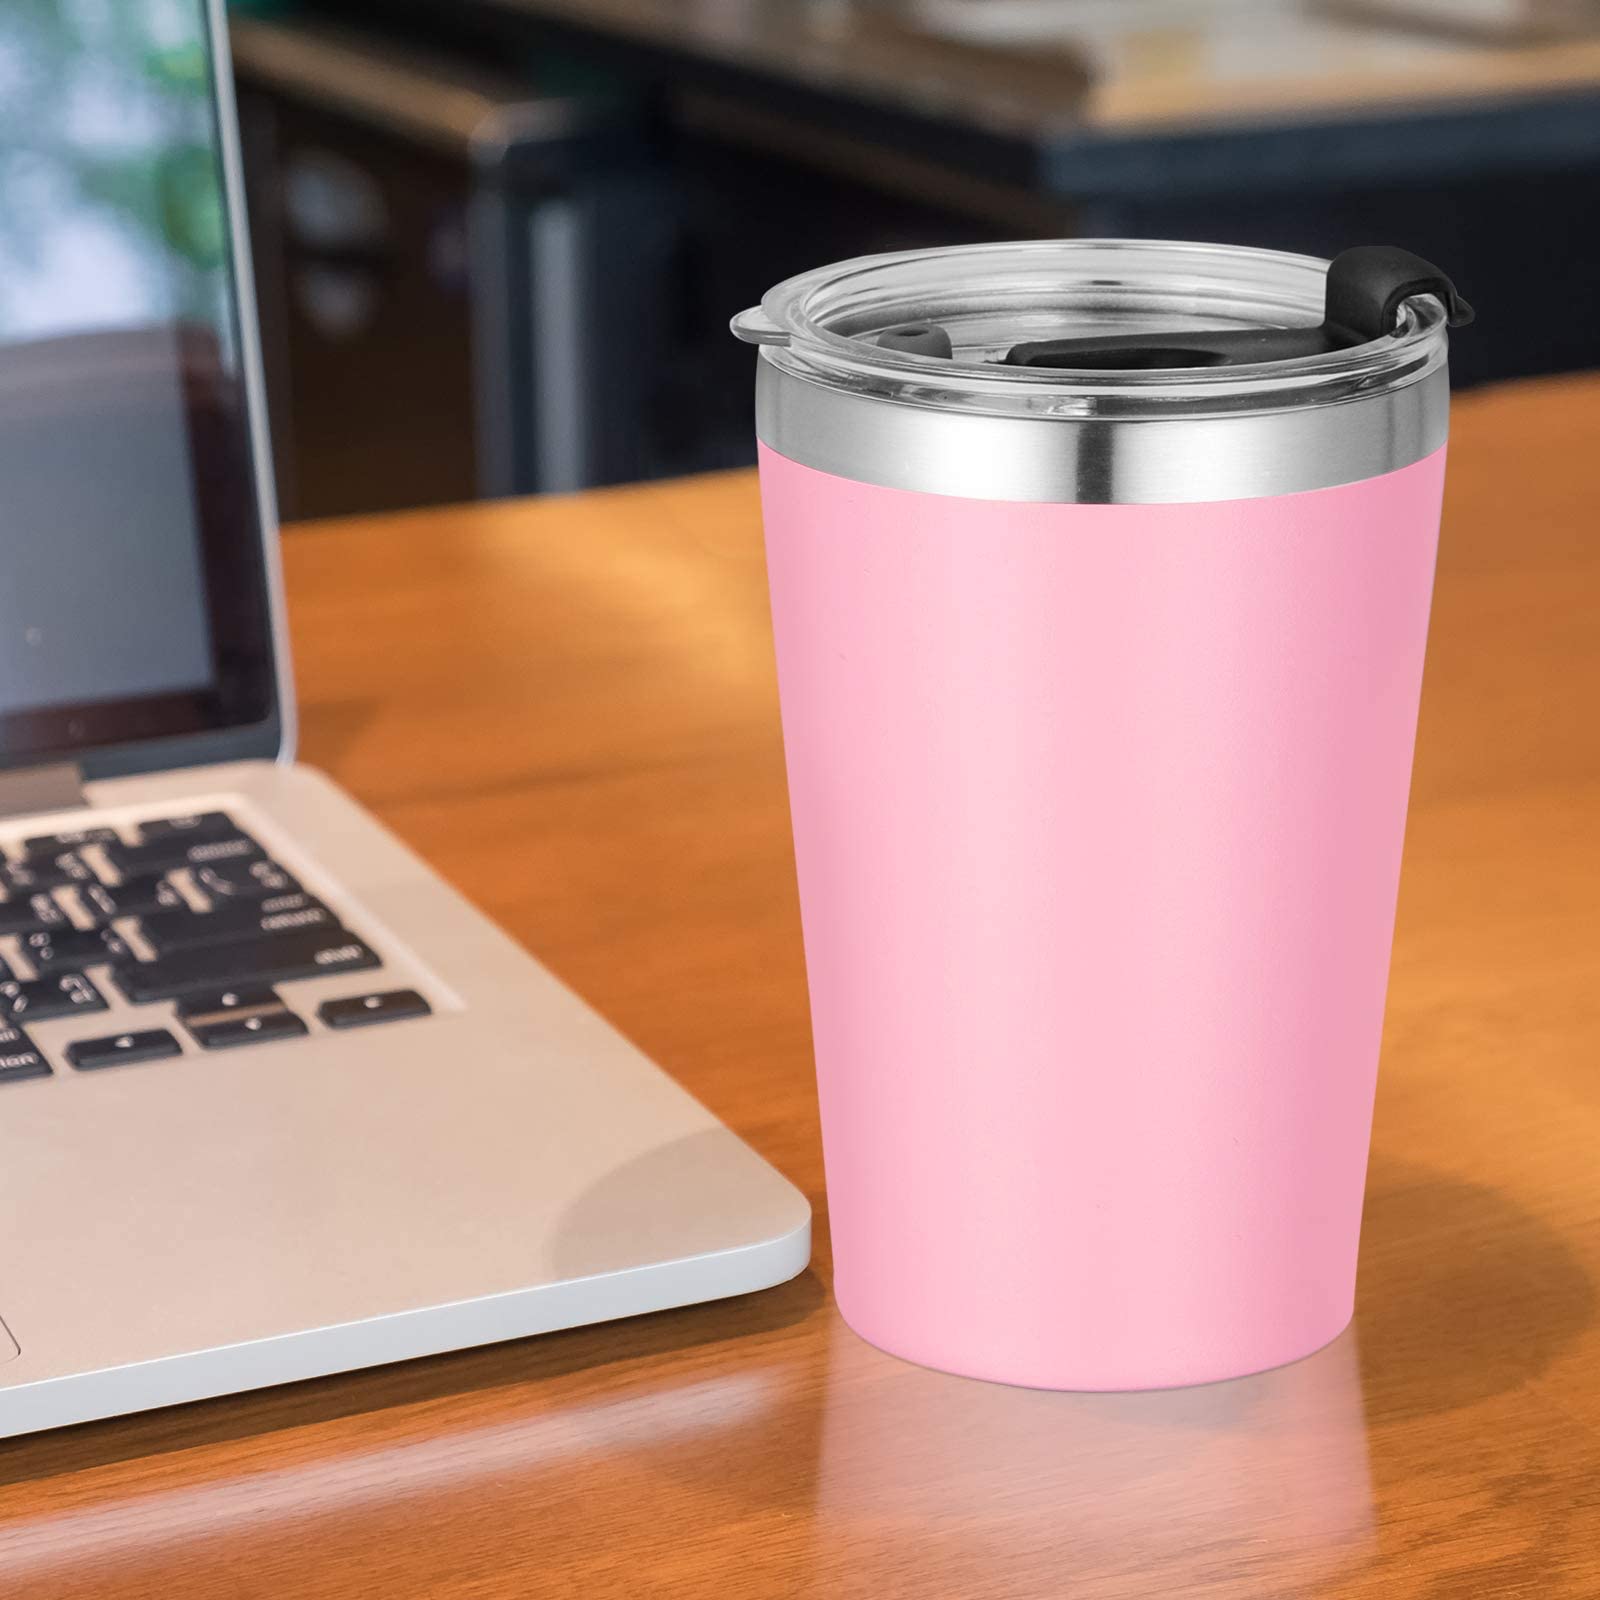 VEGOND 12oz Tumbler Stainless Steel Tumbler bulk Vacuum Insulated Double Wall Travel Tumbler with Lid and Straw Reusable Tumbler,Pink